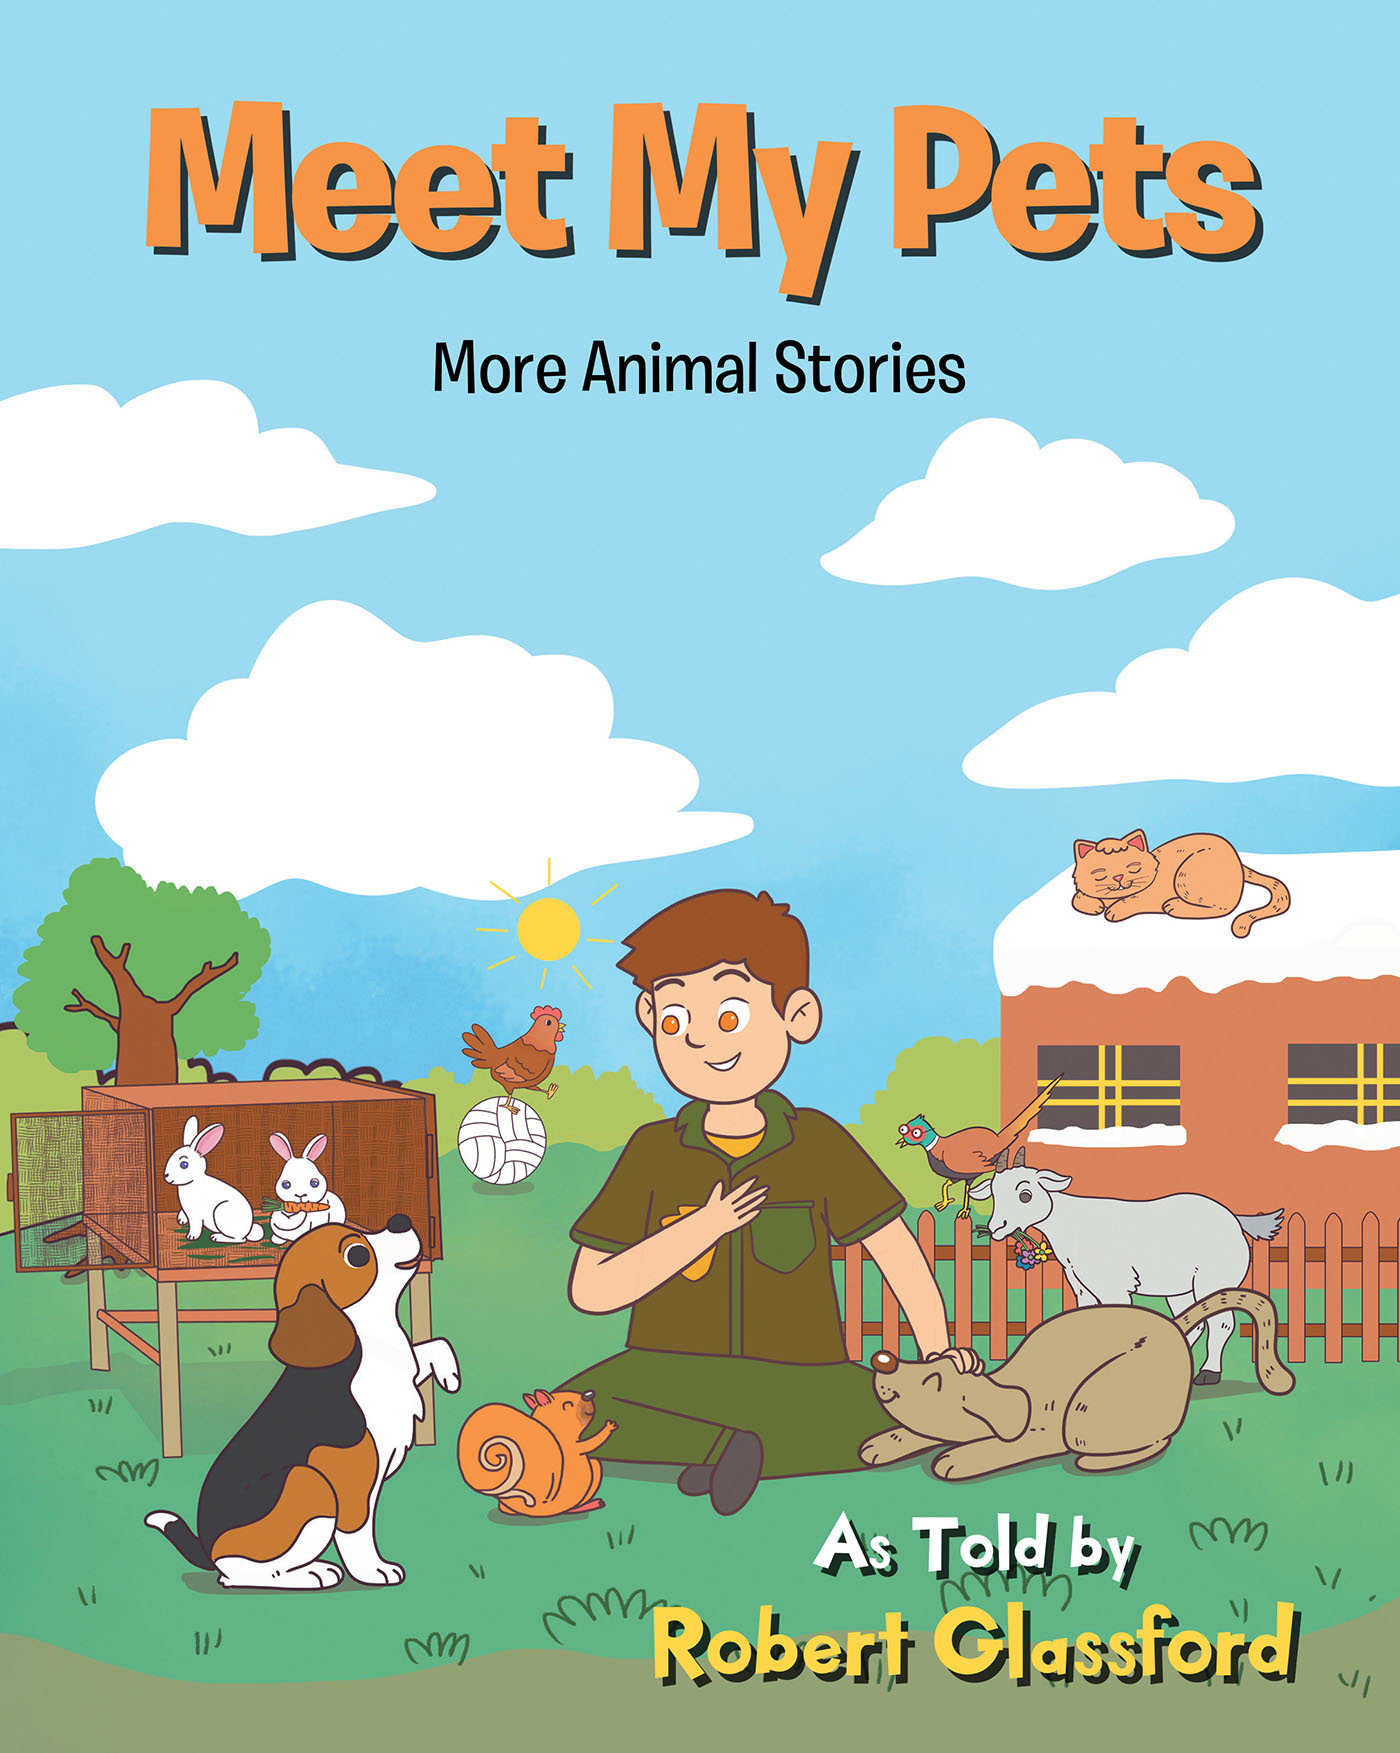 Author Robert Glassford’s New Book, "Meet My Pets: More Animal Stories," is a Delightful Series of Stories Inspired by the Author’s Pets That He Had Over the Years